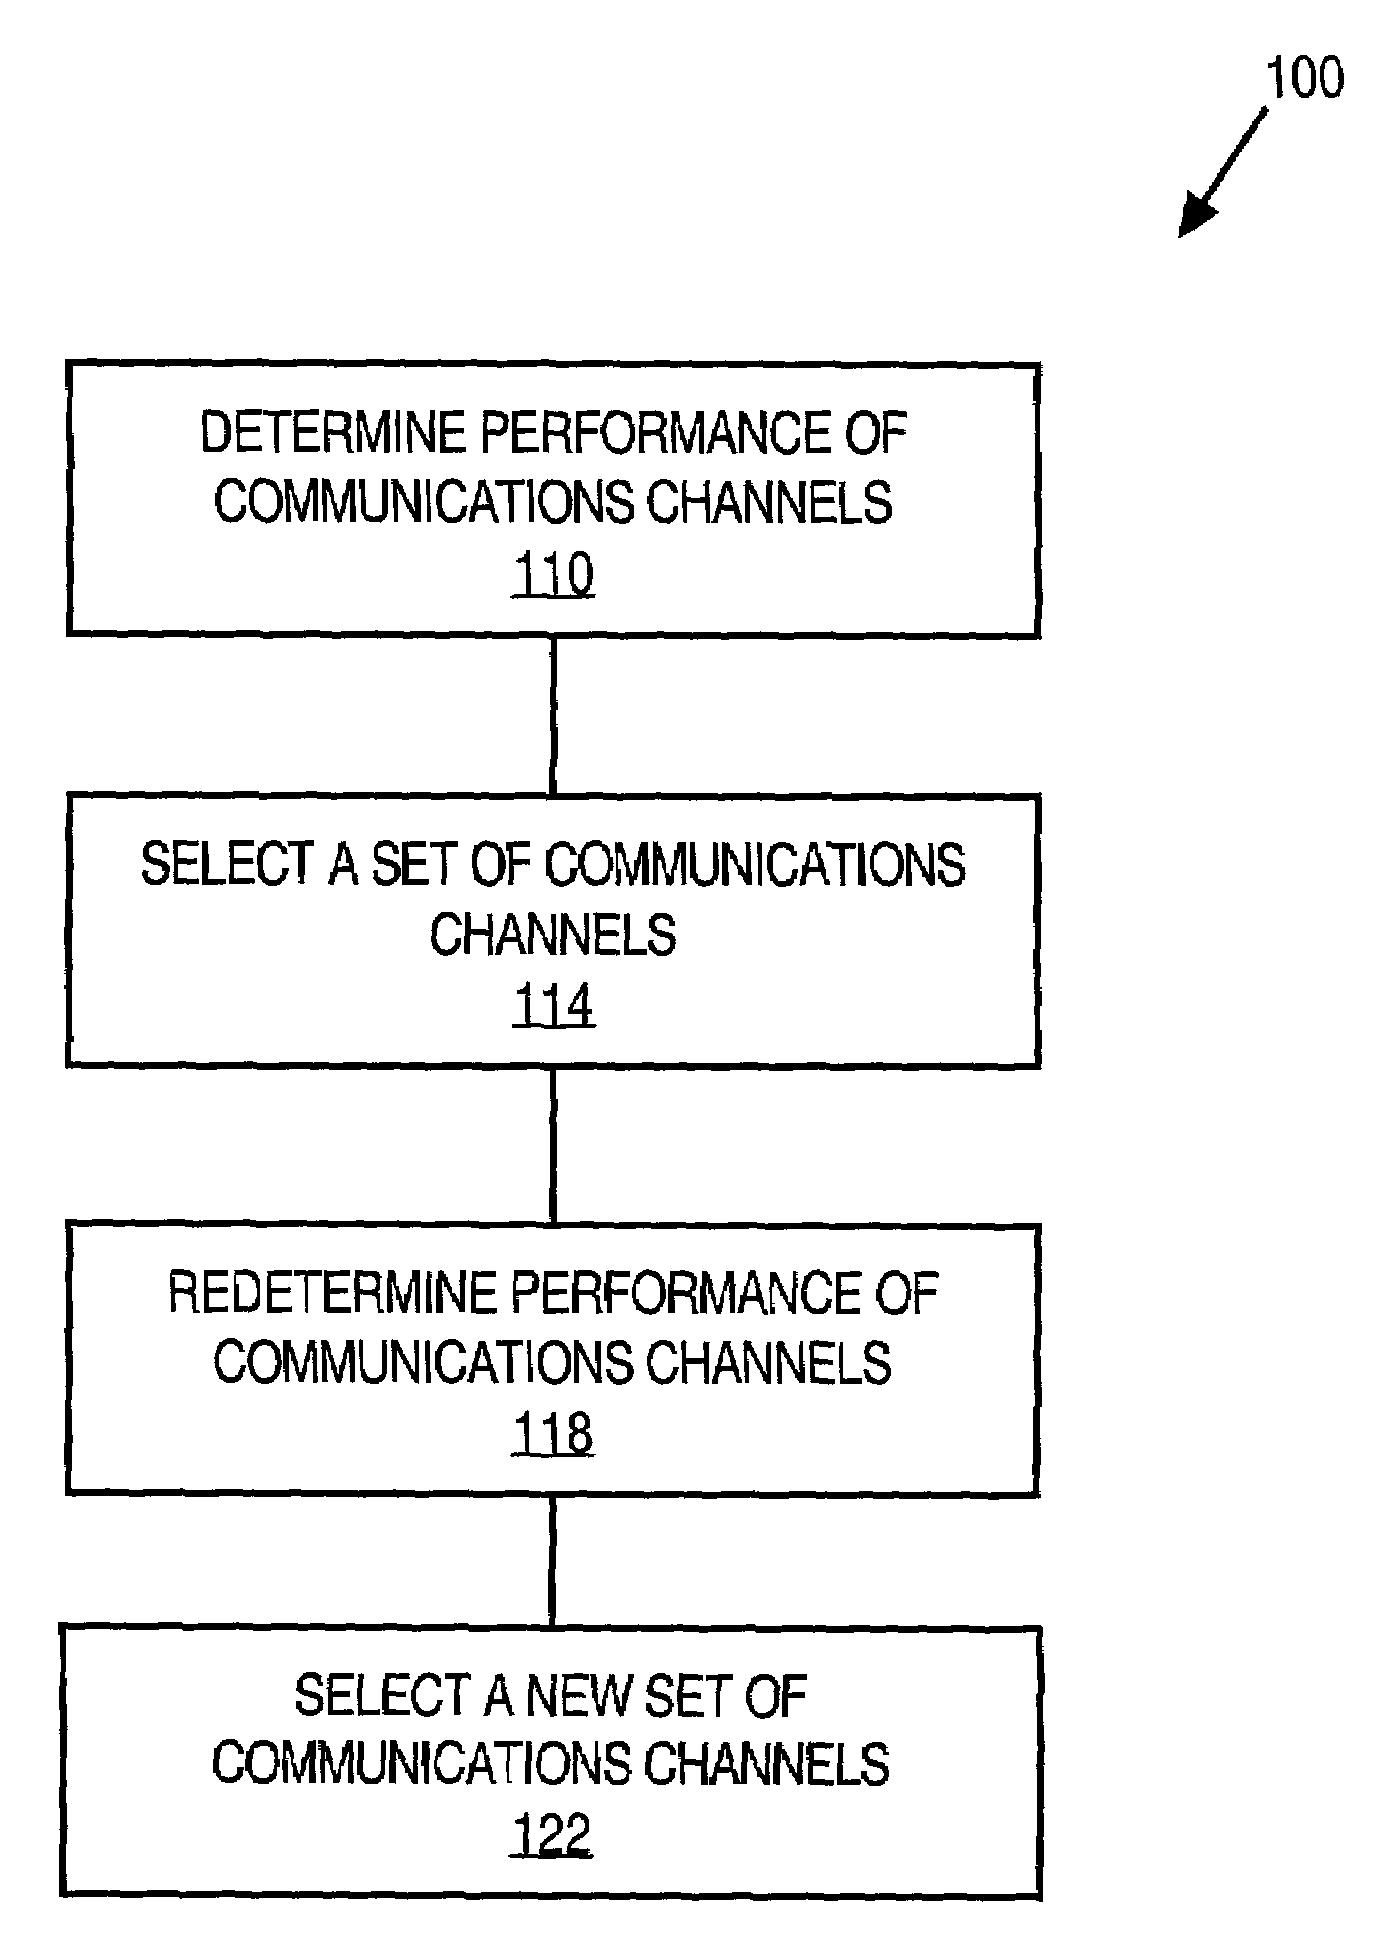 Approach for selecting communications channels based on performance